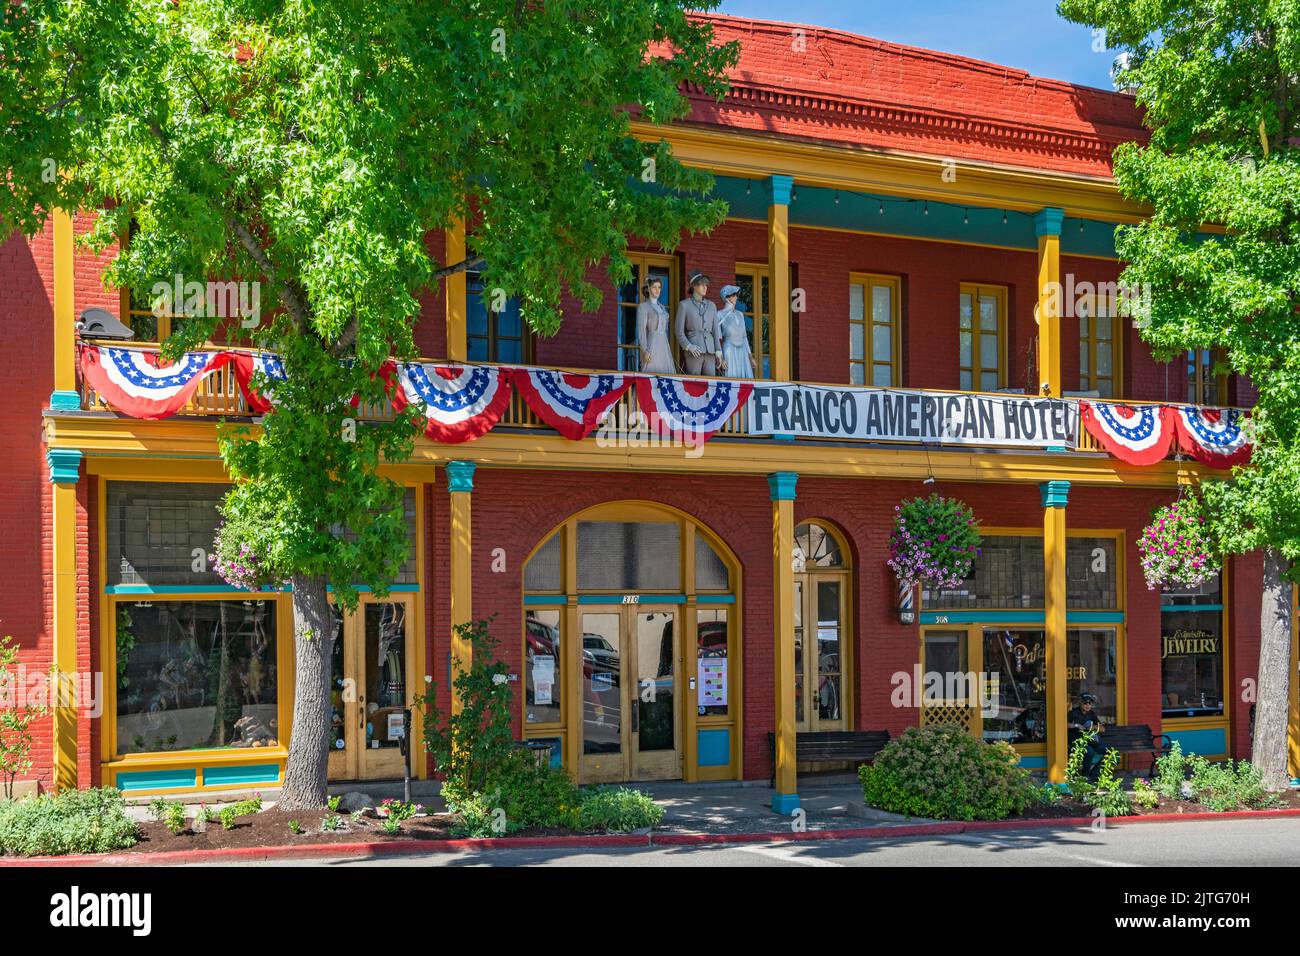 California, Yreka, Old Town, Franco American Hotel, started 1855, mannequins on balcony Stock Photo